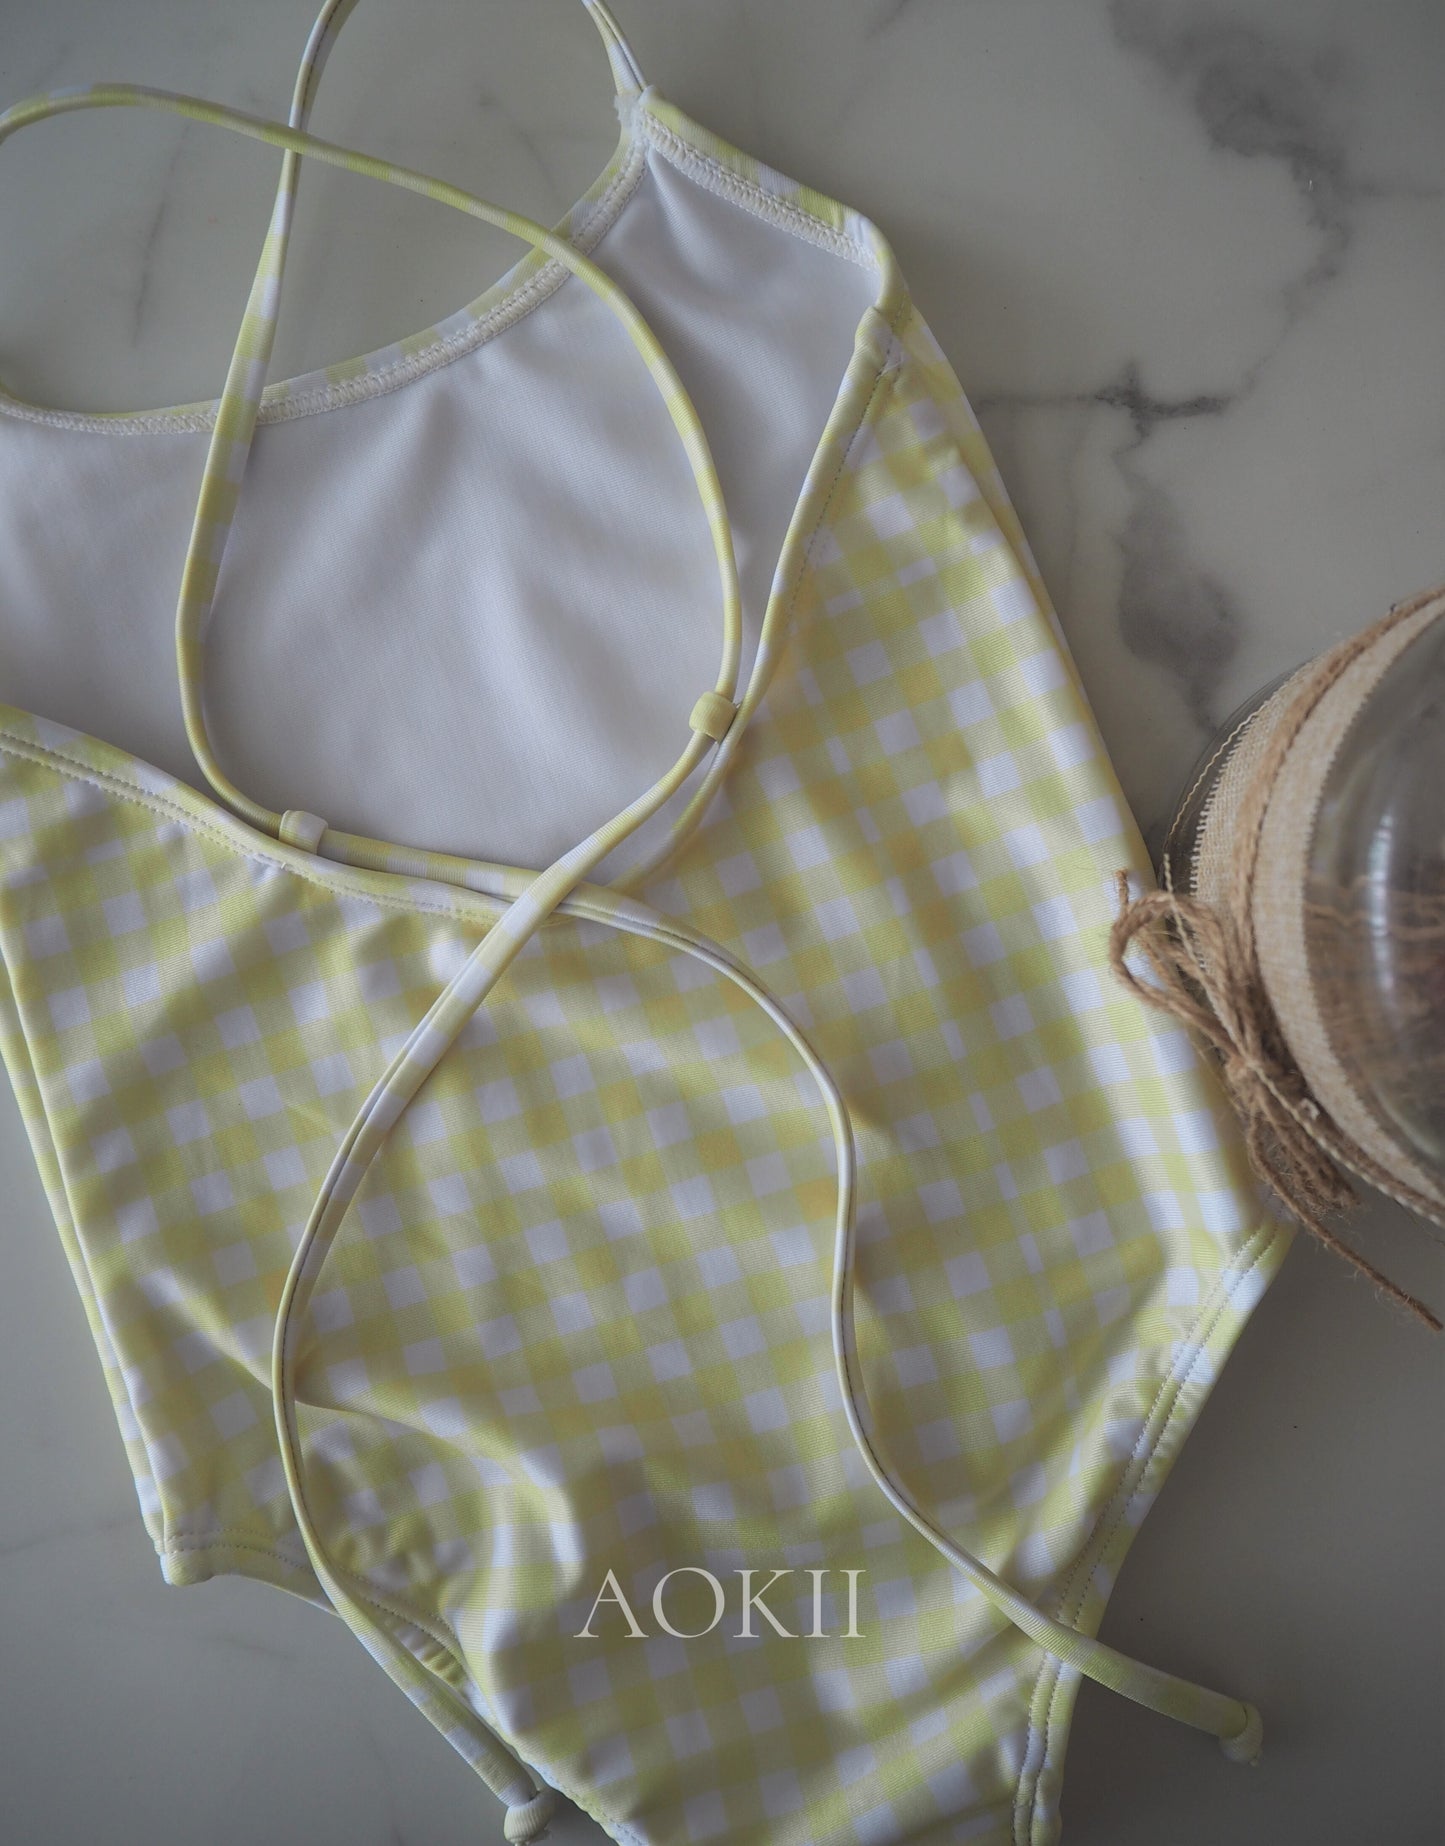 Eco-friendly sustainable swimwear series for children's birthday gift and baby shower gift ideas